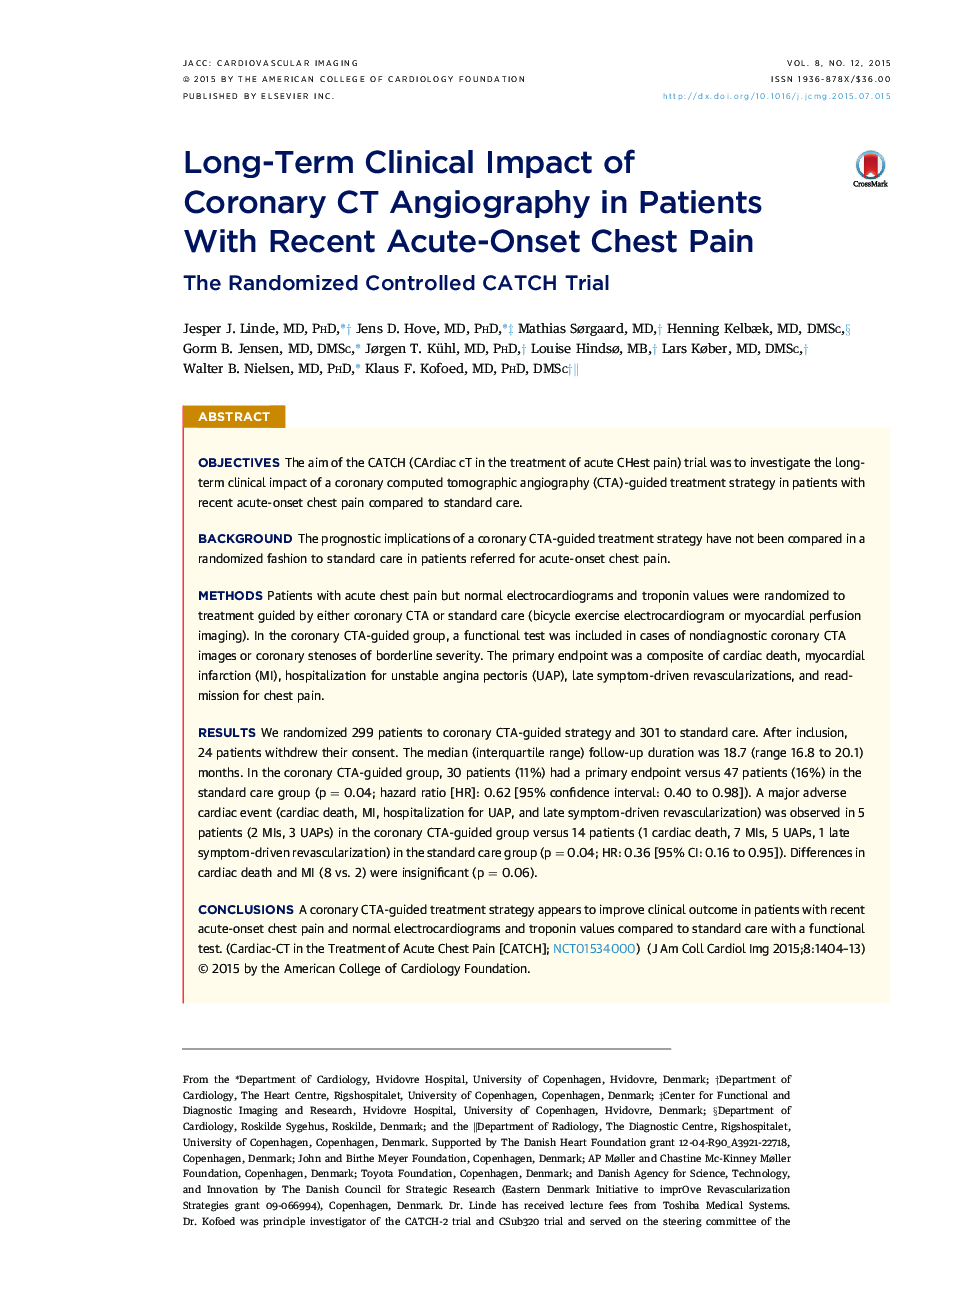 Long-Term Clinical Impact of CoronaryÂ CTÂ Angiography in Patients WithÂ RecentÂ Acute-Onset Chest Pain: The Randomized Controlled CATCH Trial